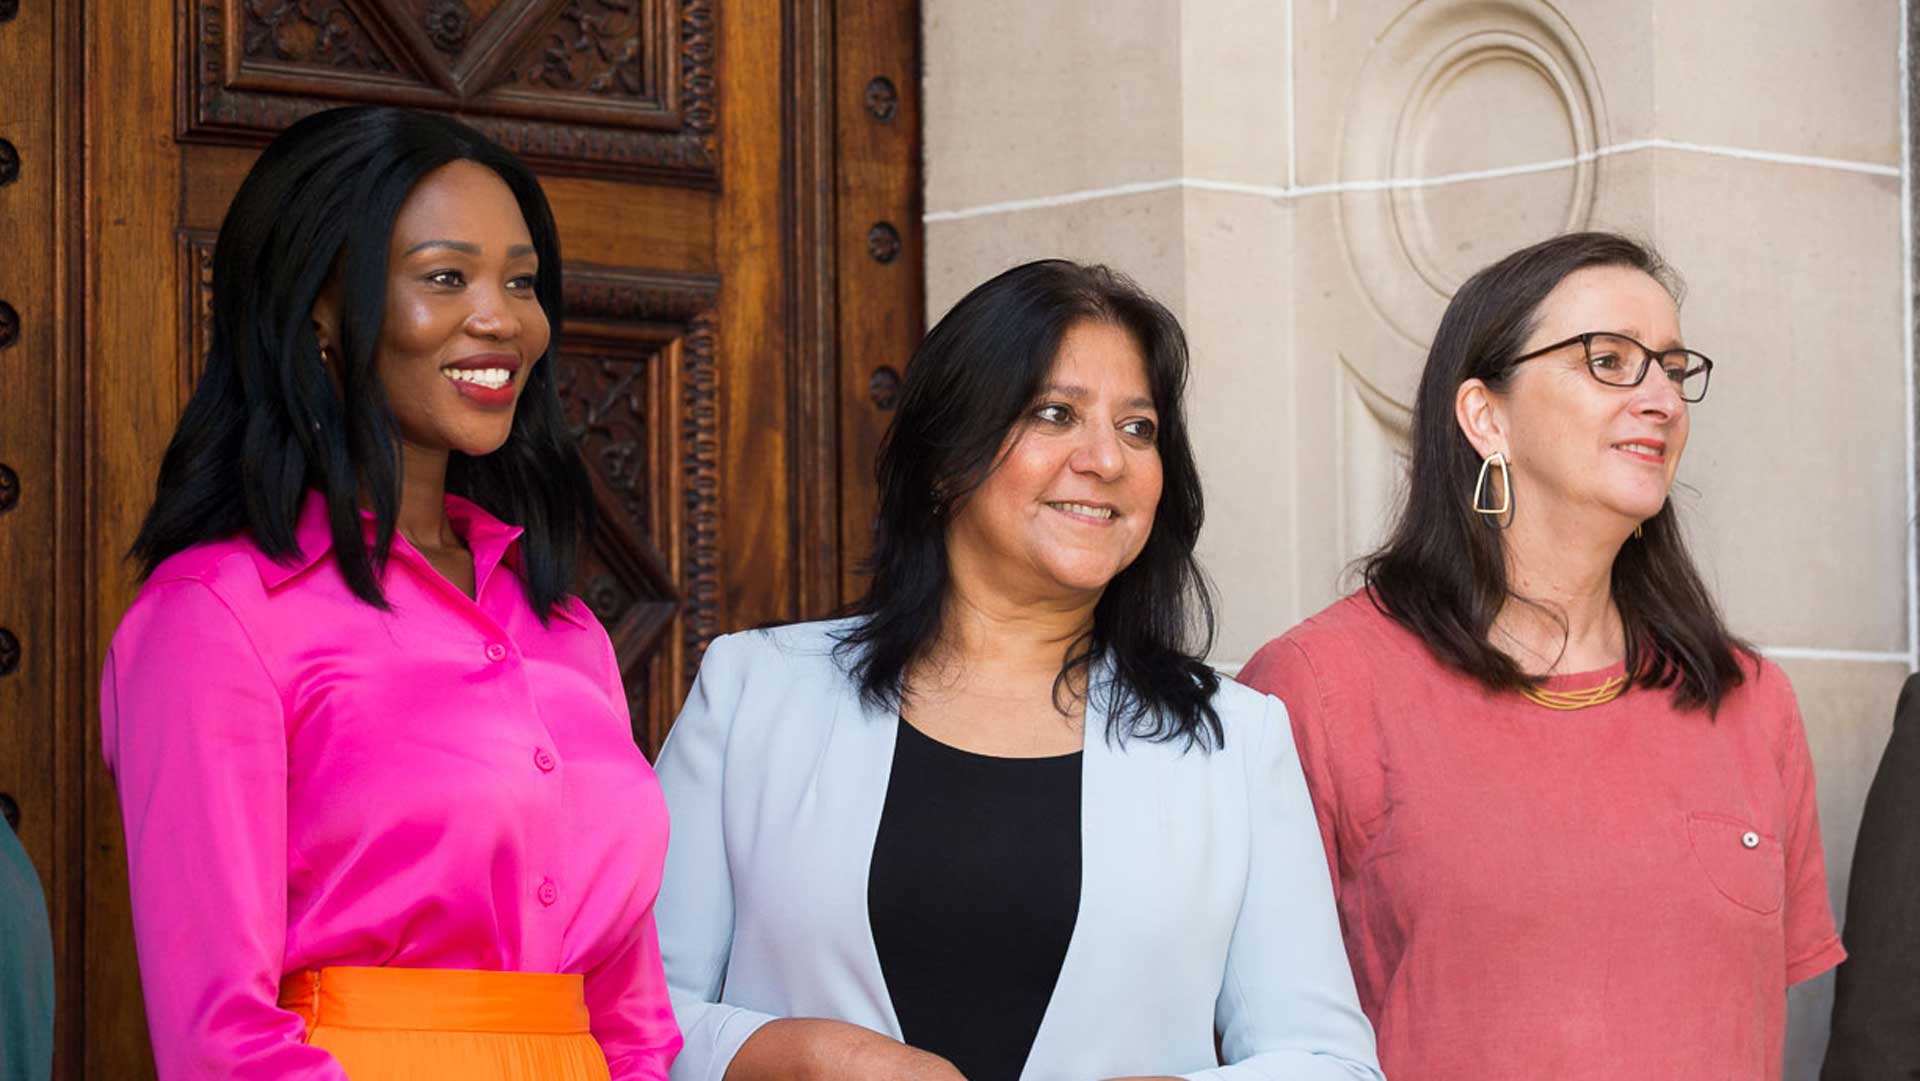 Candid, smiling photo of three brightly dressed diverse women standing outside a parliamentary building